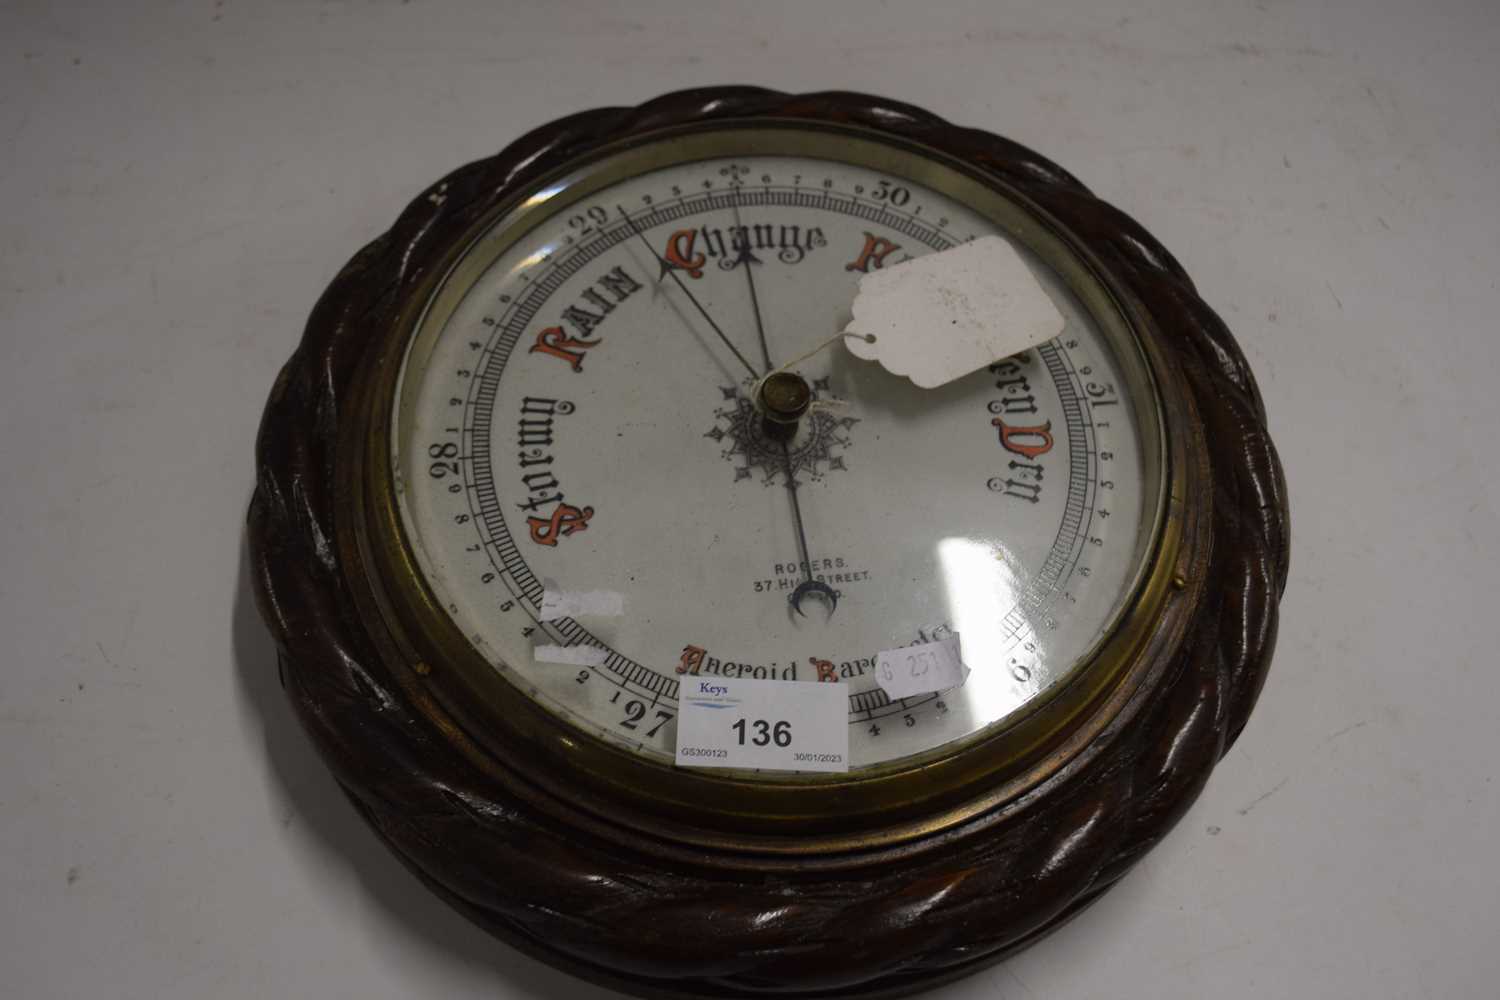 Late 19th Century aneroid barometer, the face signed Rogers, High Street, Oxford